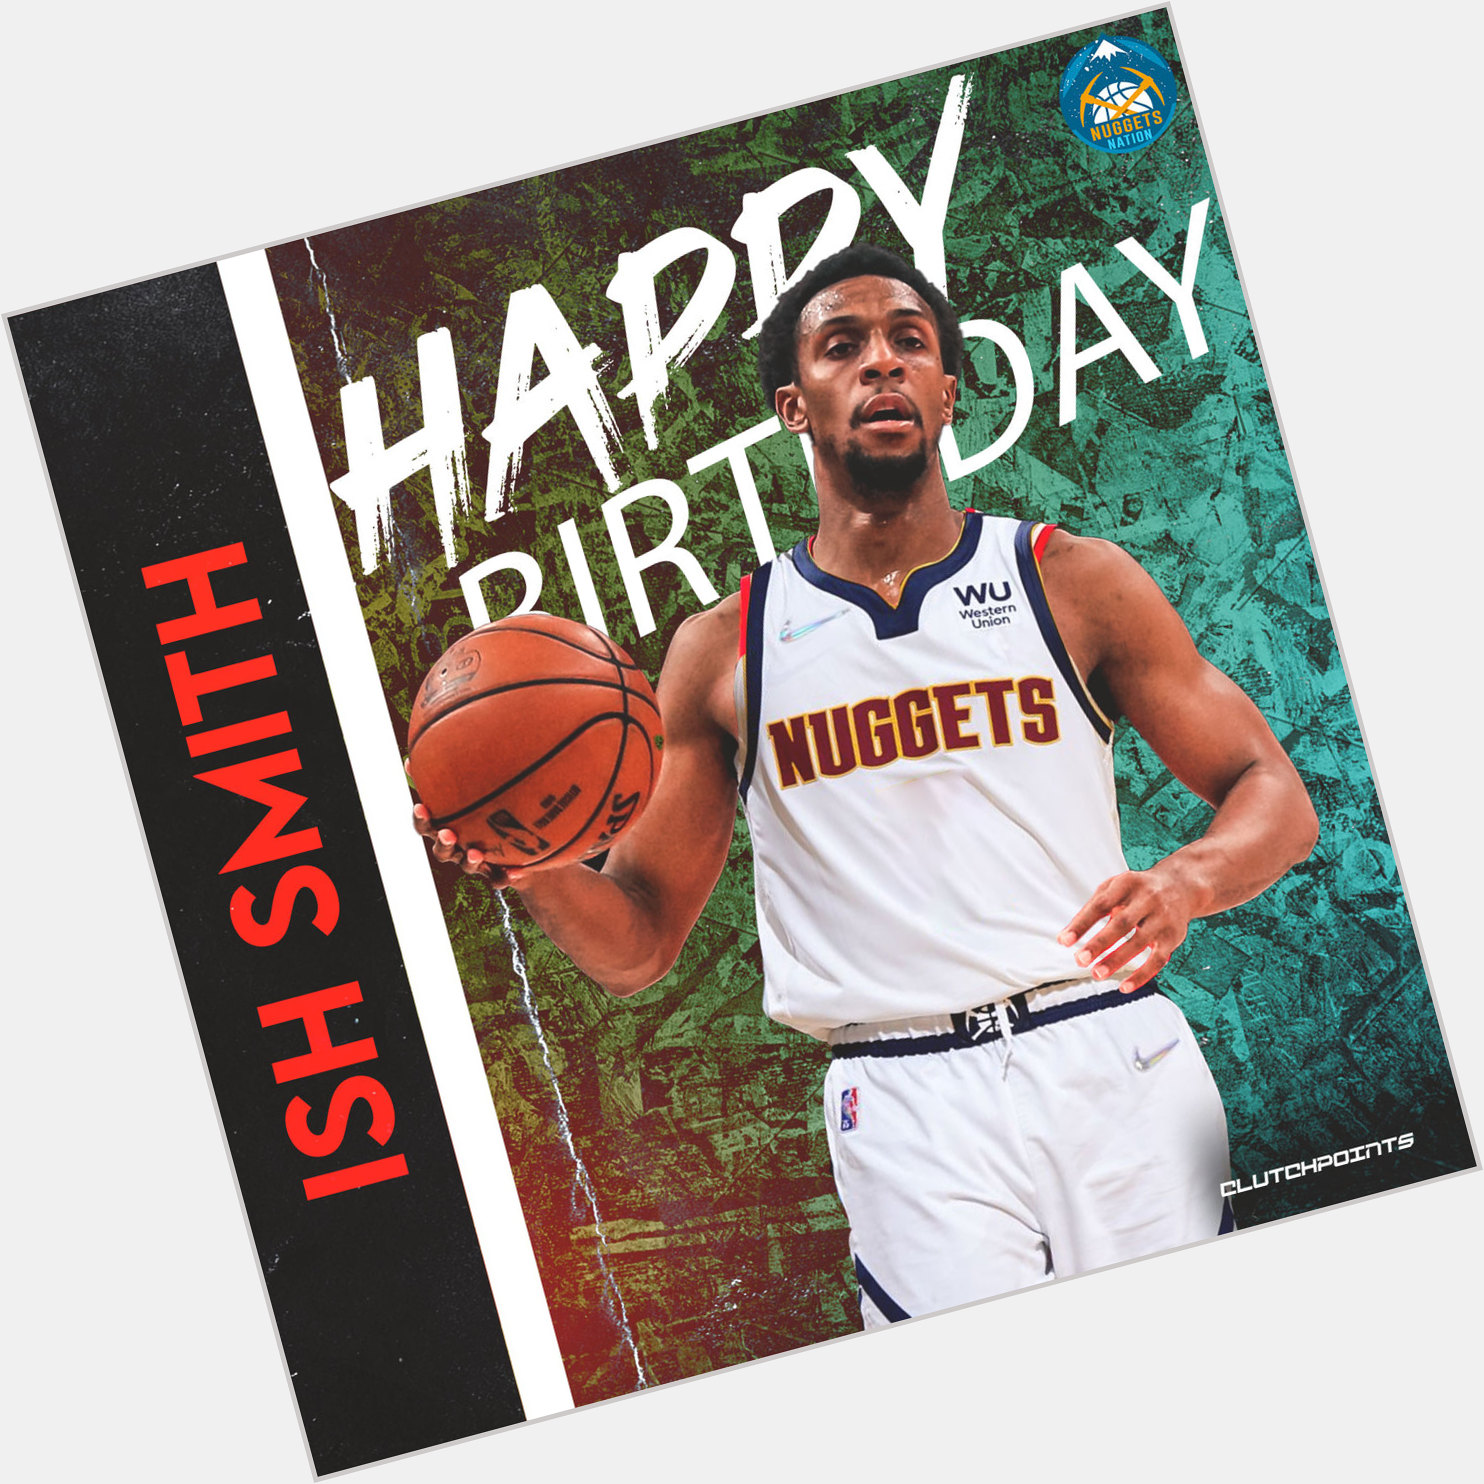 Nuggets nation, let us all wish Ish Smith a very happy birthday! 